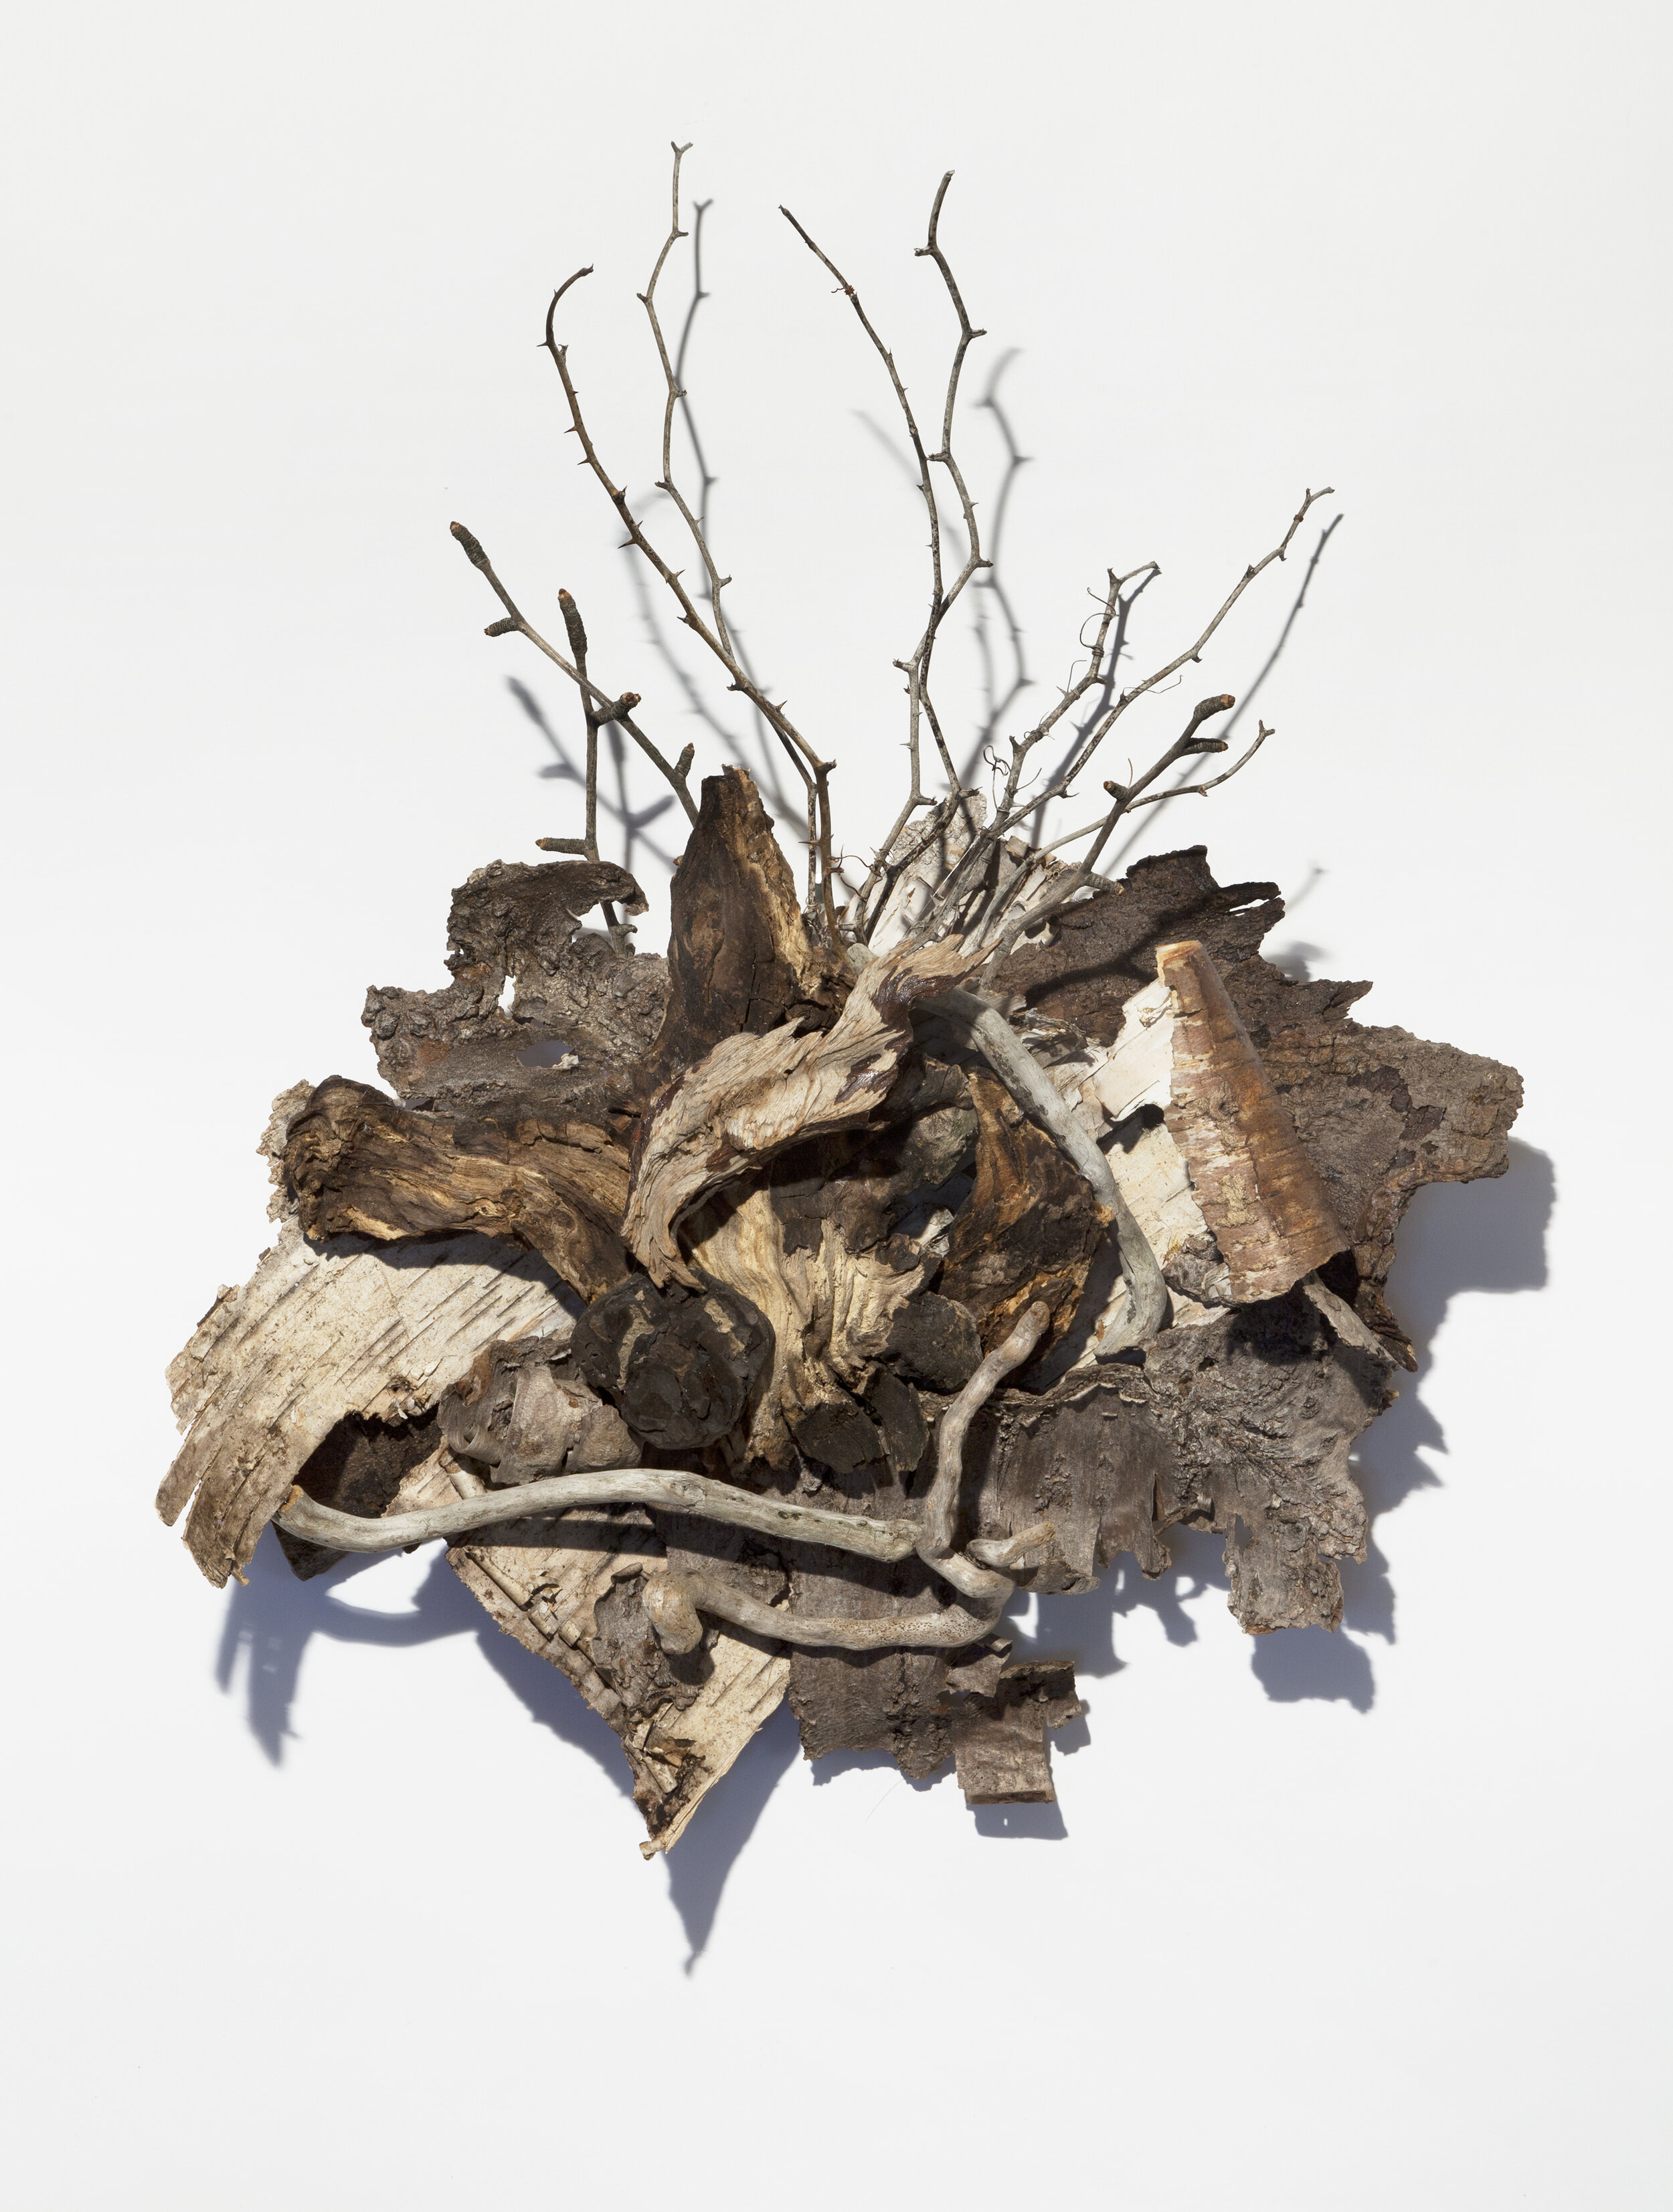    Reveal 1   wood, twigs, 24 x 19 x 8 inches&nbsp; 